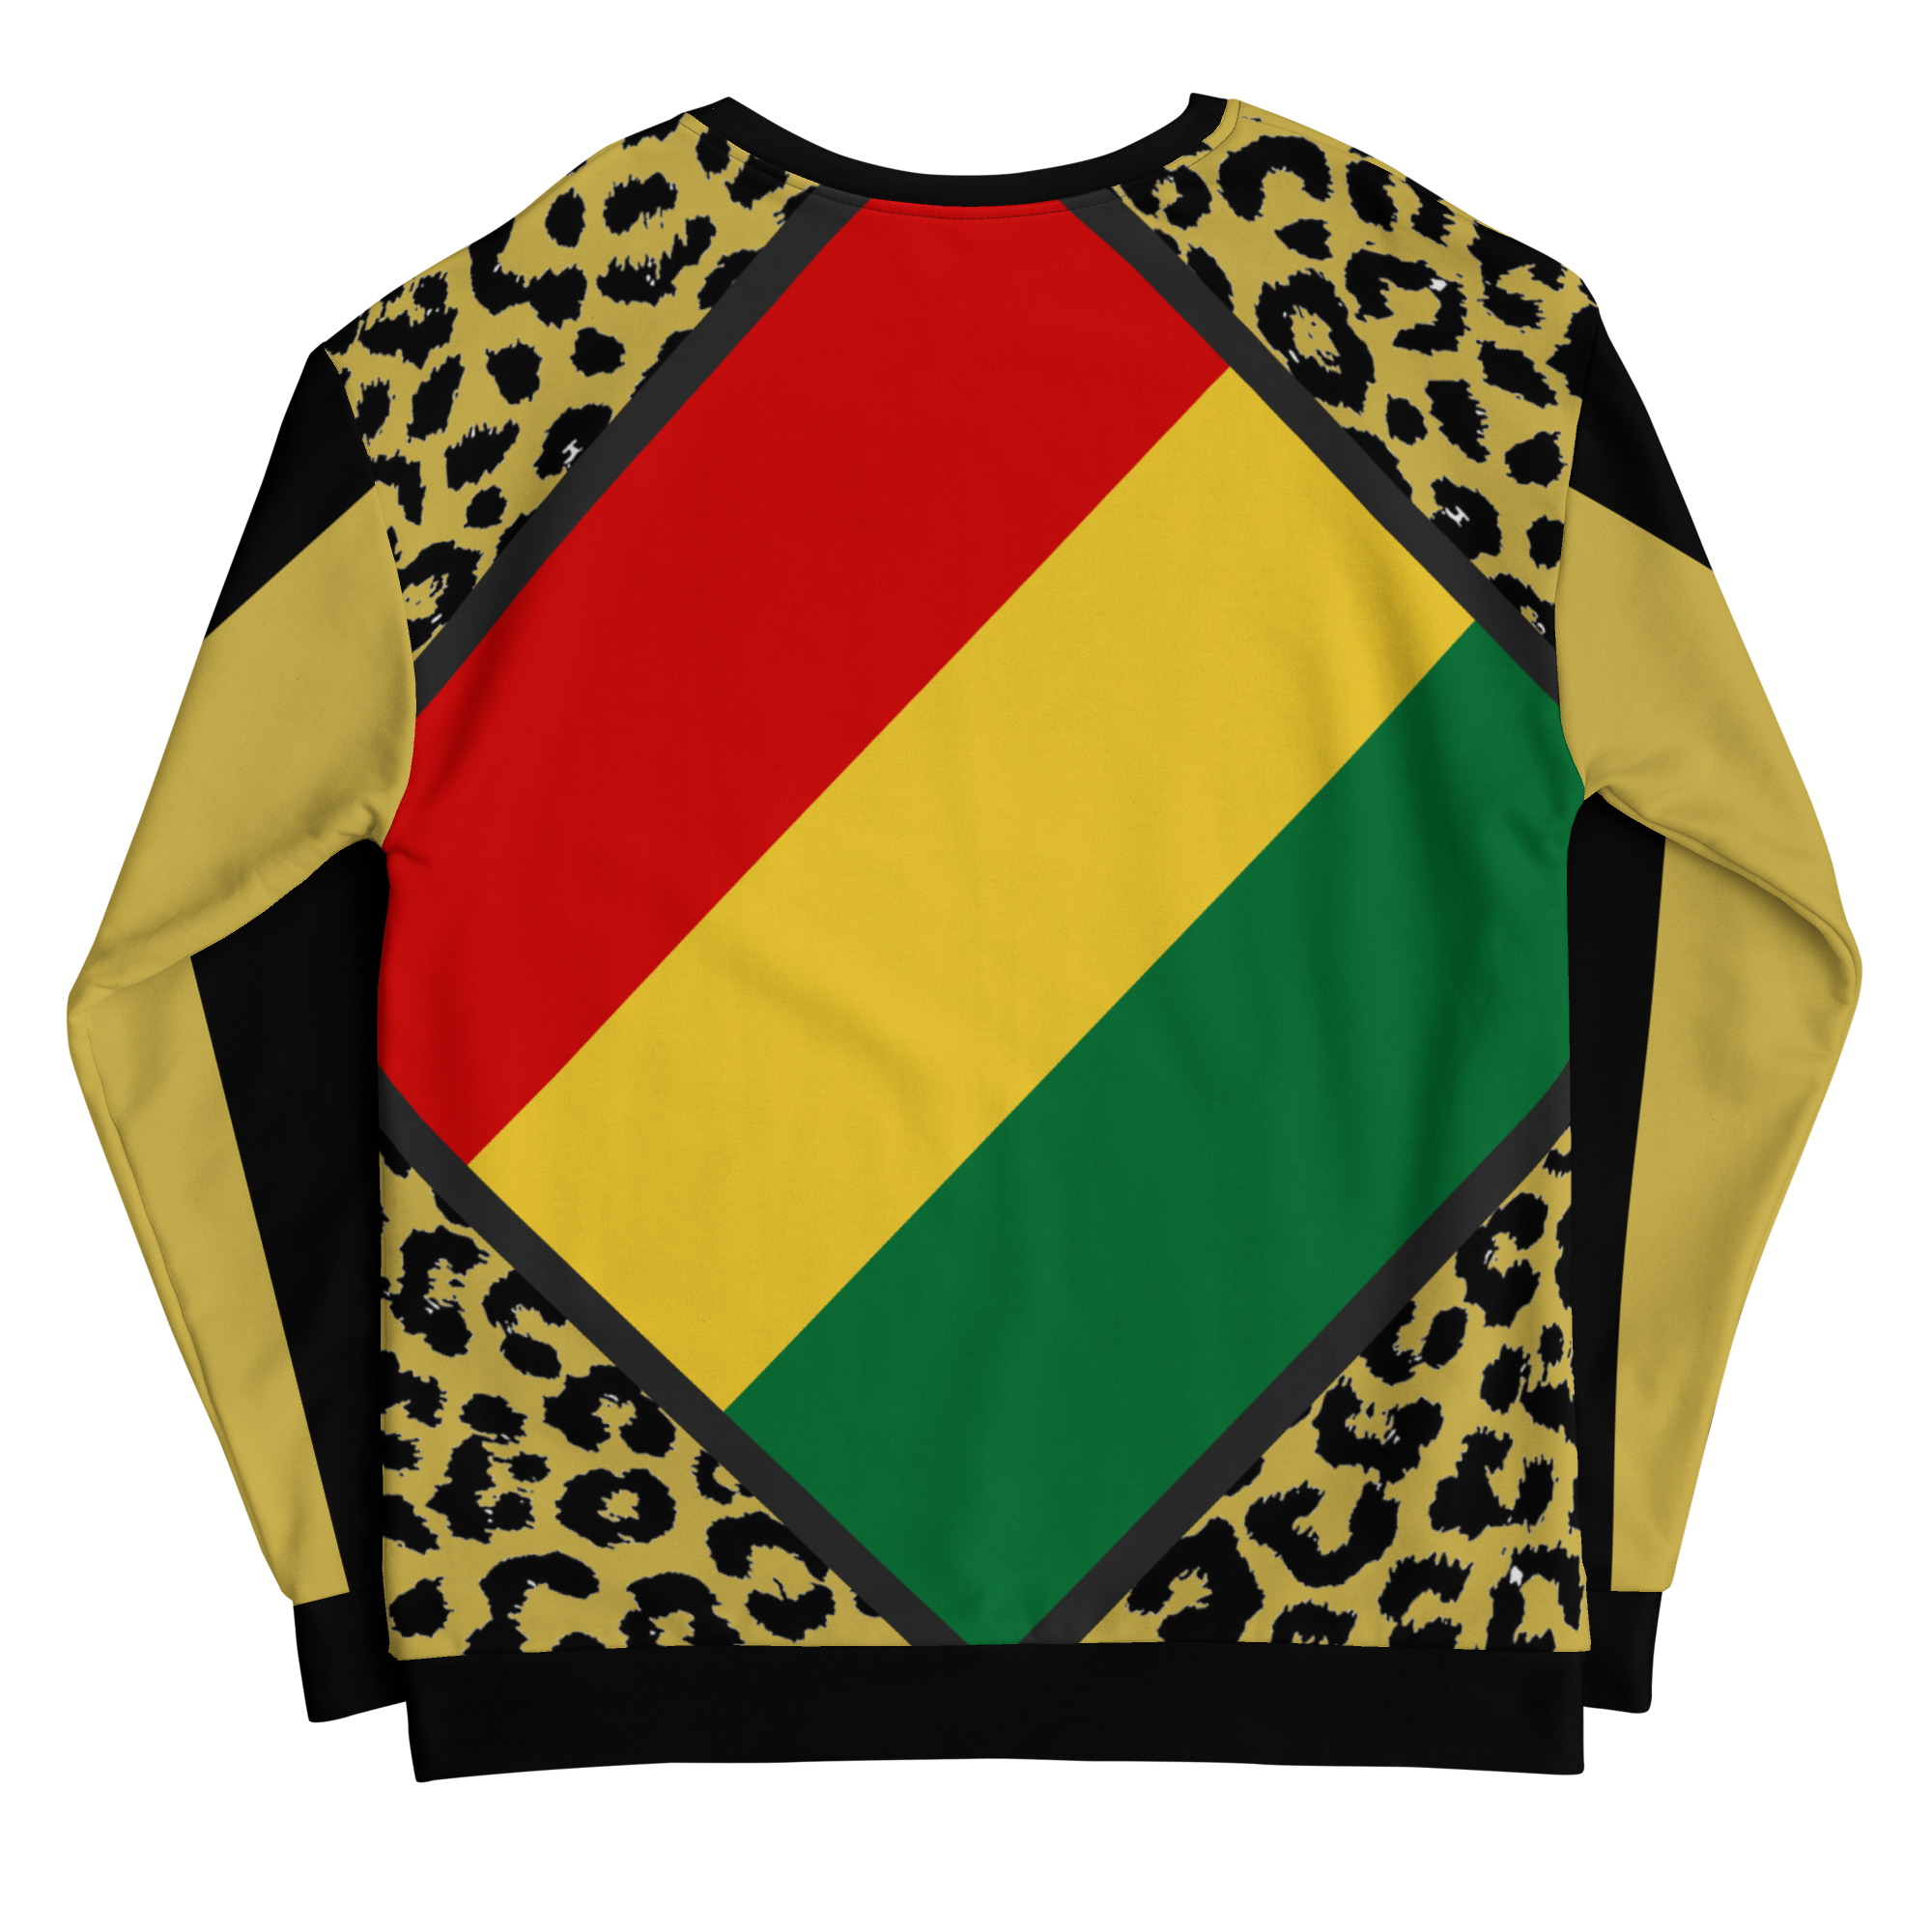  all-over printed sweatshirt with nyabinghi rasta flag and leopard print accents